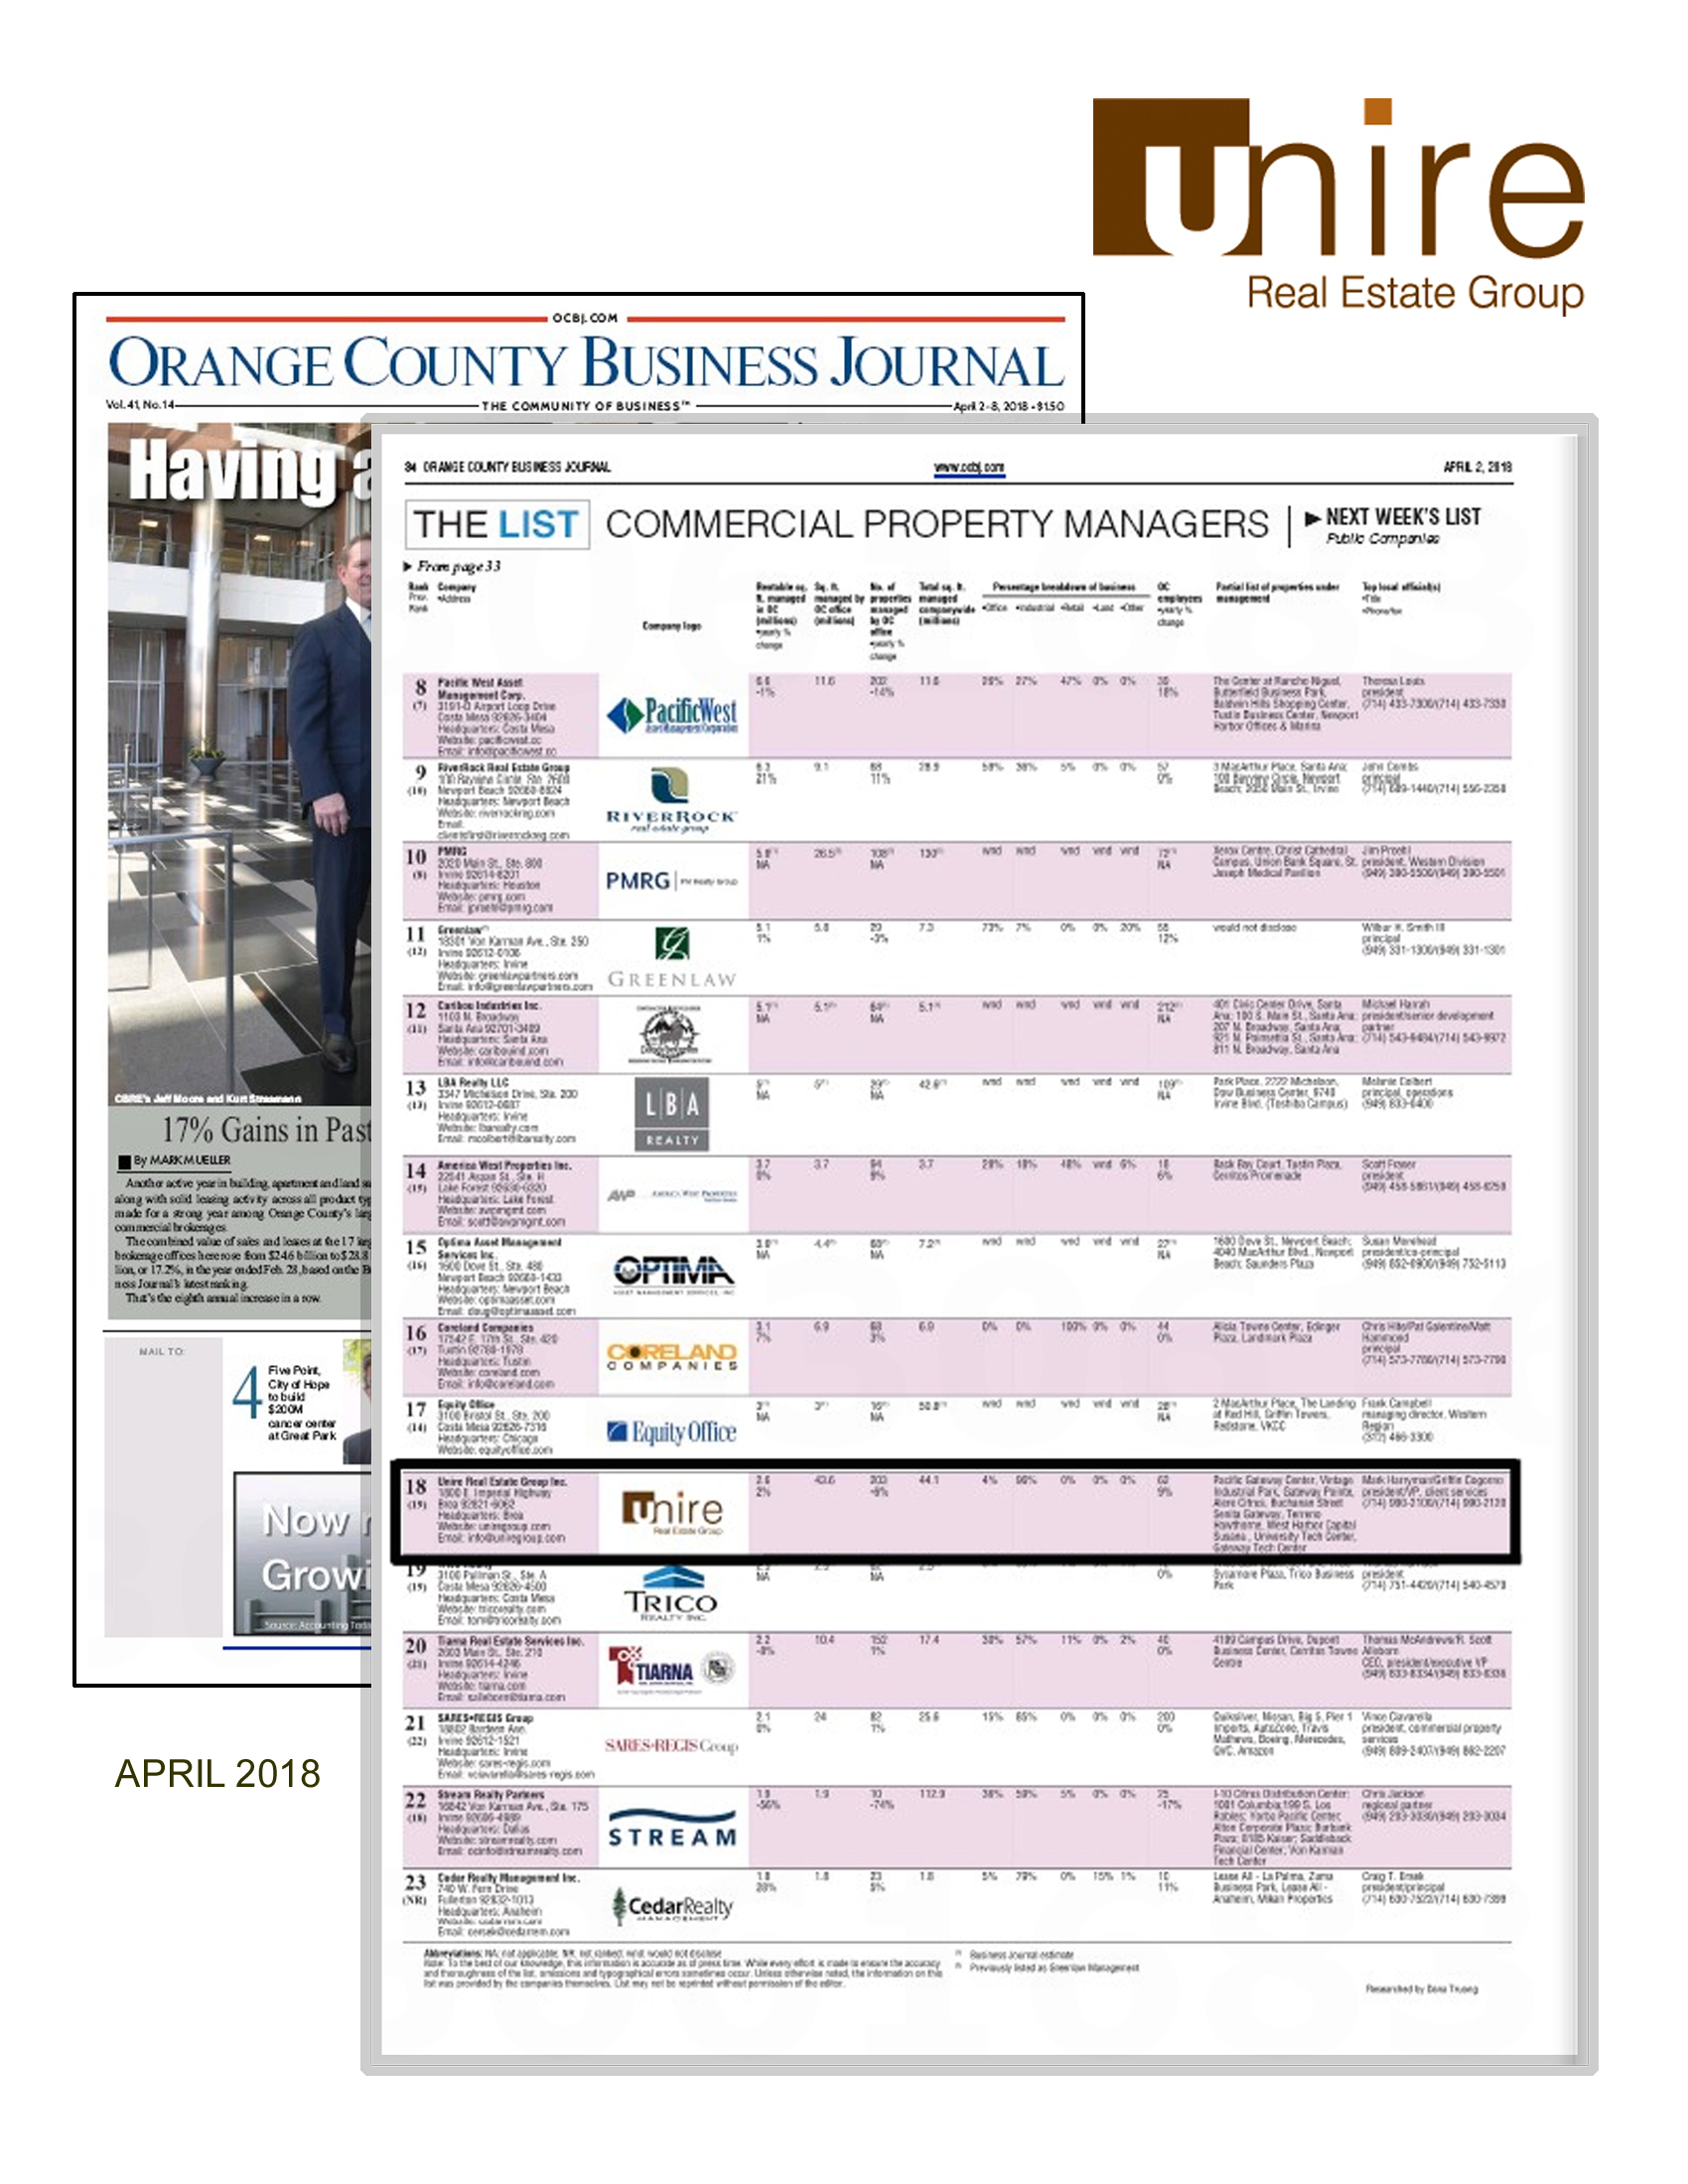 Unire Group Named to Top Commercial Property Manager List for OCBJ